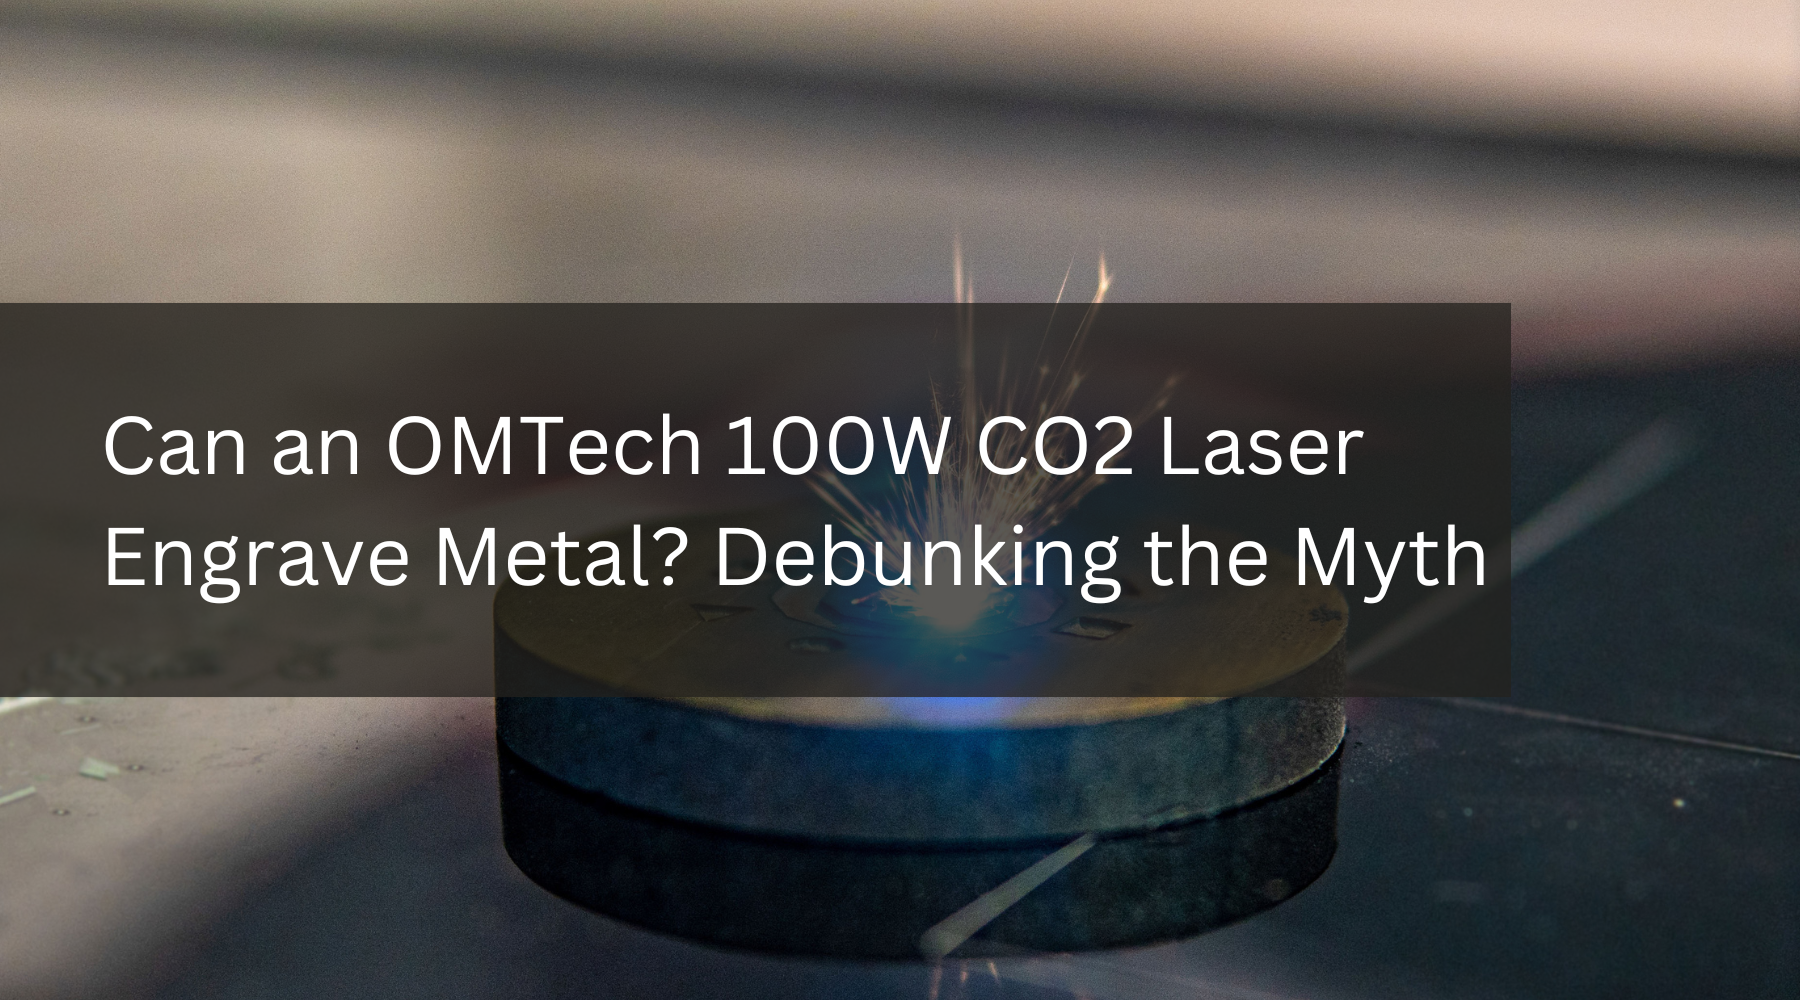 Can an OMTech 100W CO2 Laser Engrave Metal? Debunking the Myth